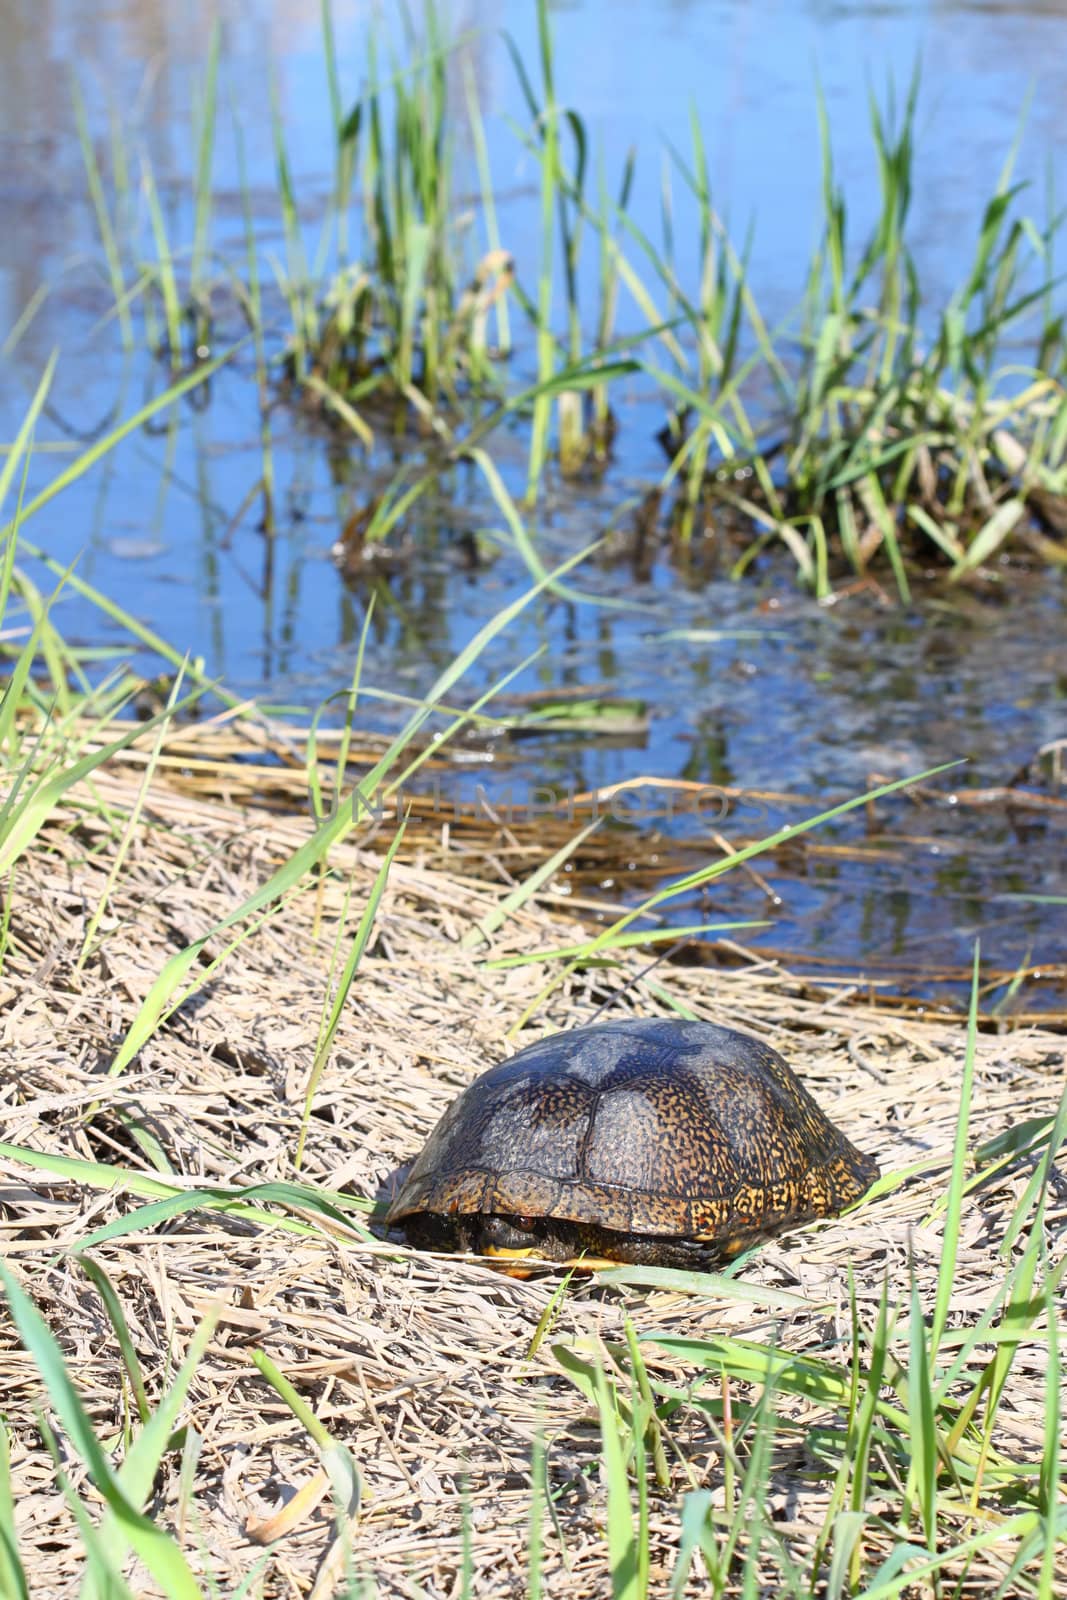 Blandings Turtle (Emydoidea blandingii) basking on a sunny spring day in the midwestern United States.